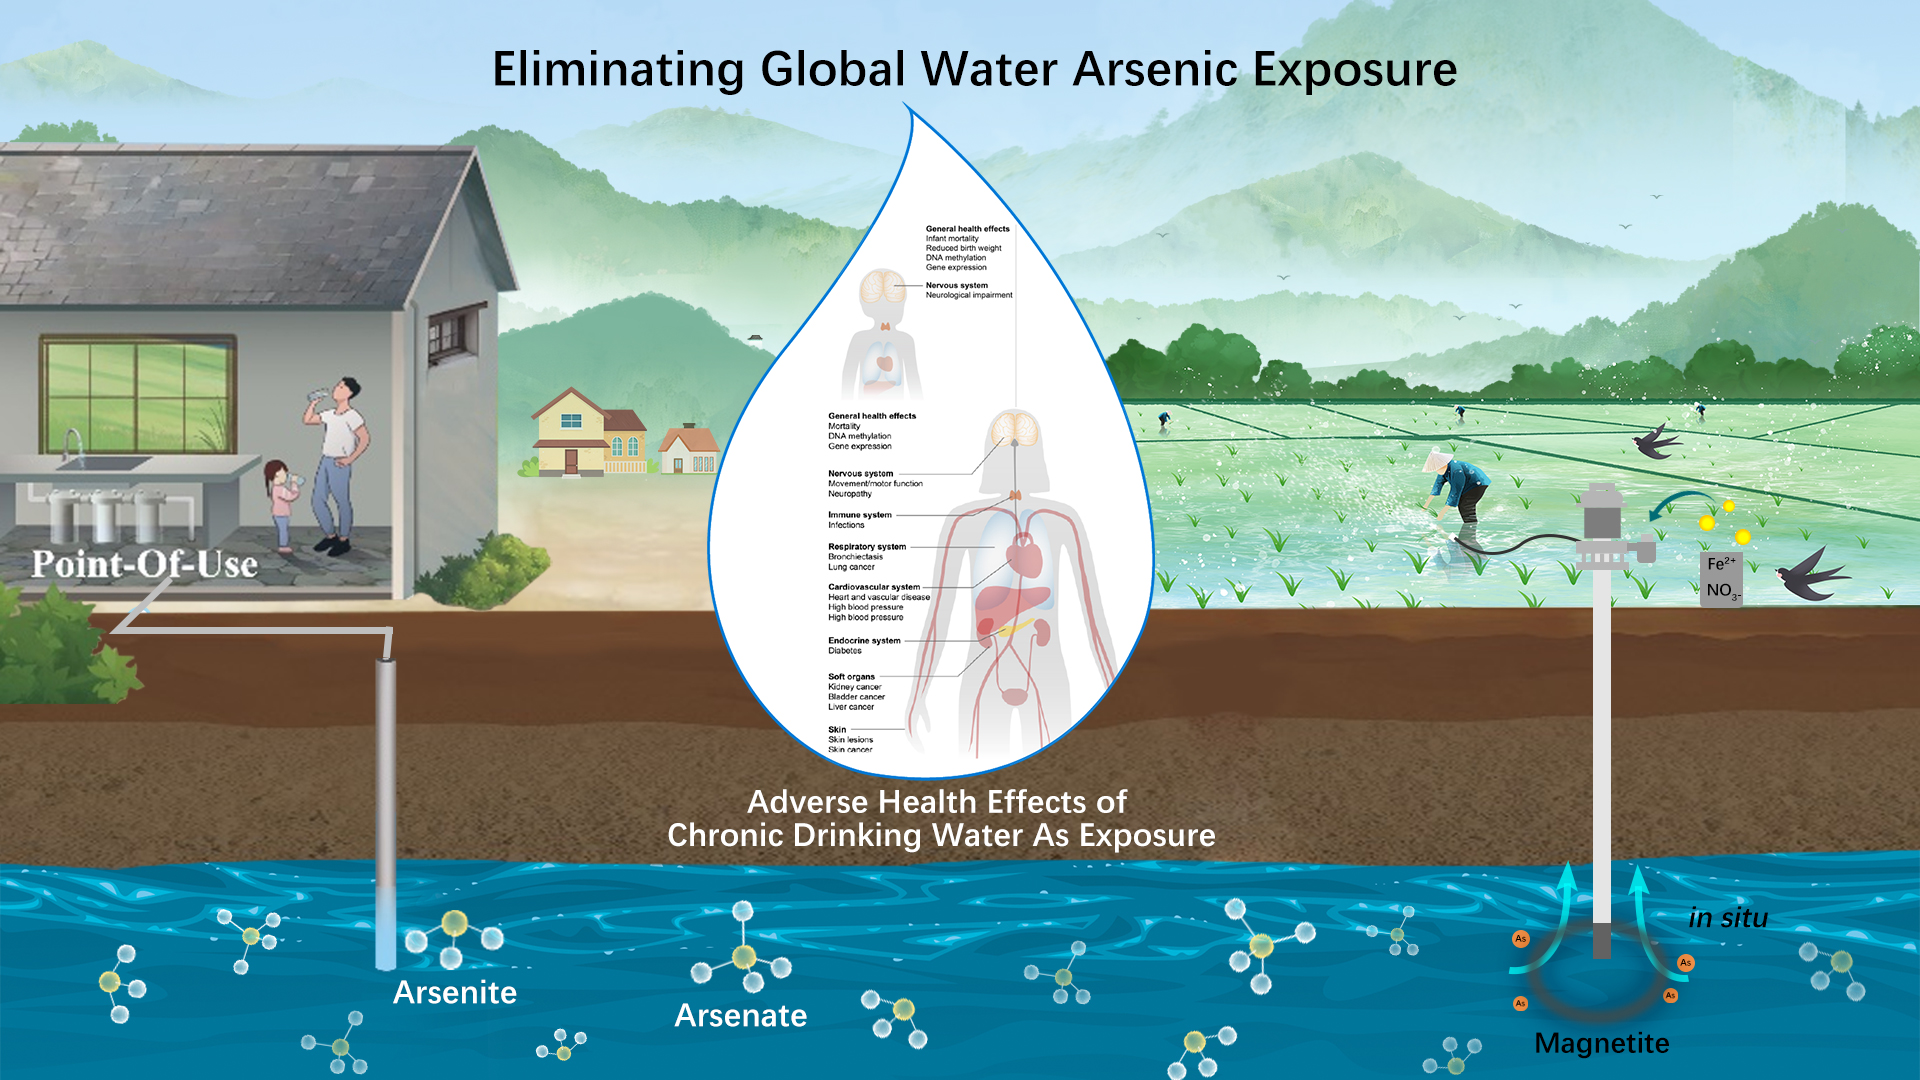 Researchers collaborate to publish series of studies that contribute to eliminating exposure to groundwater arsenic globally